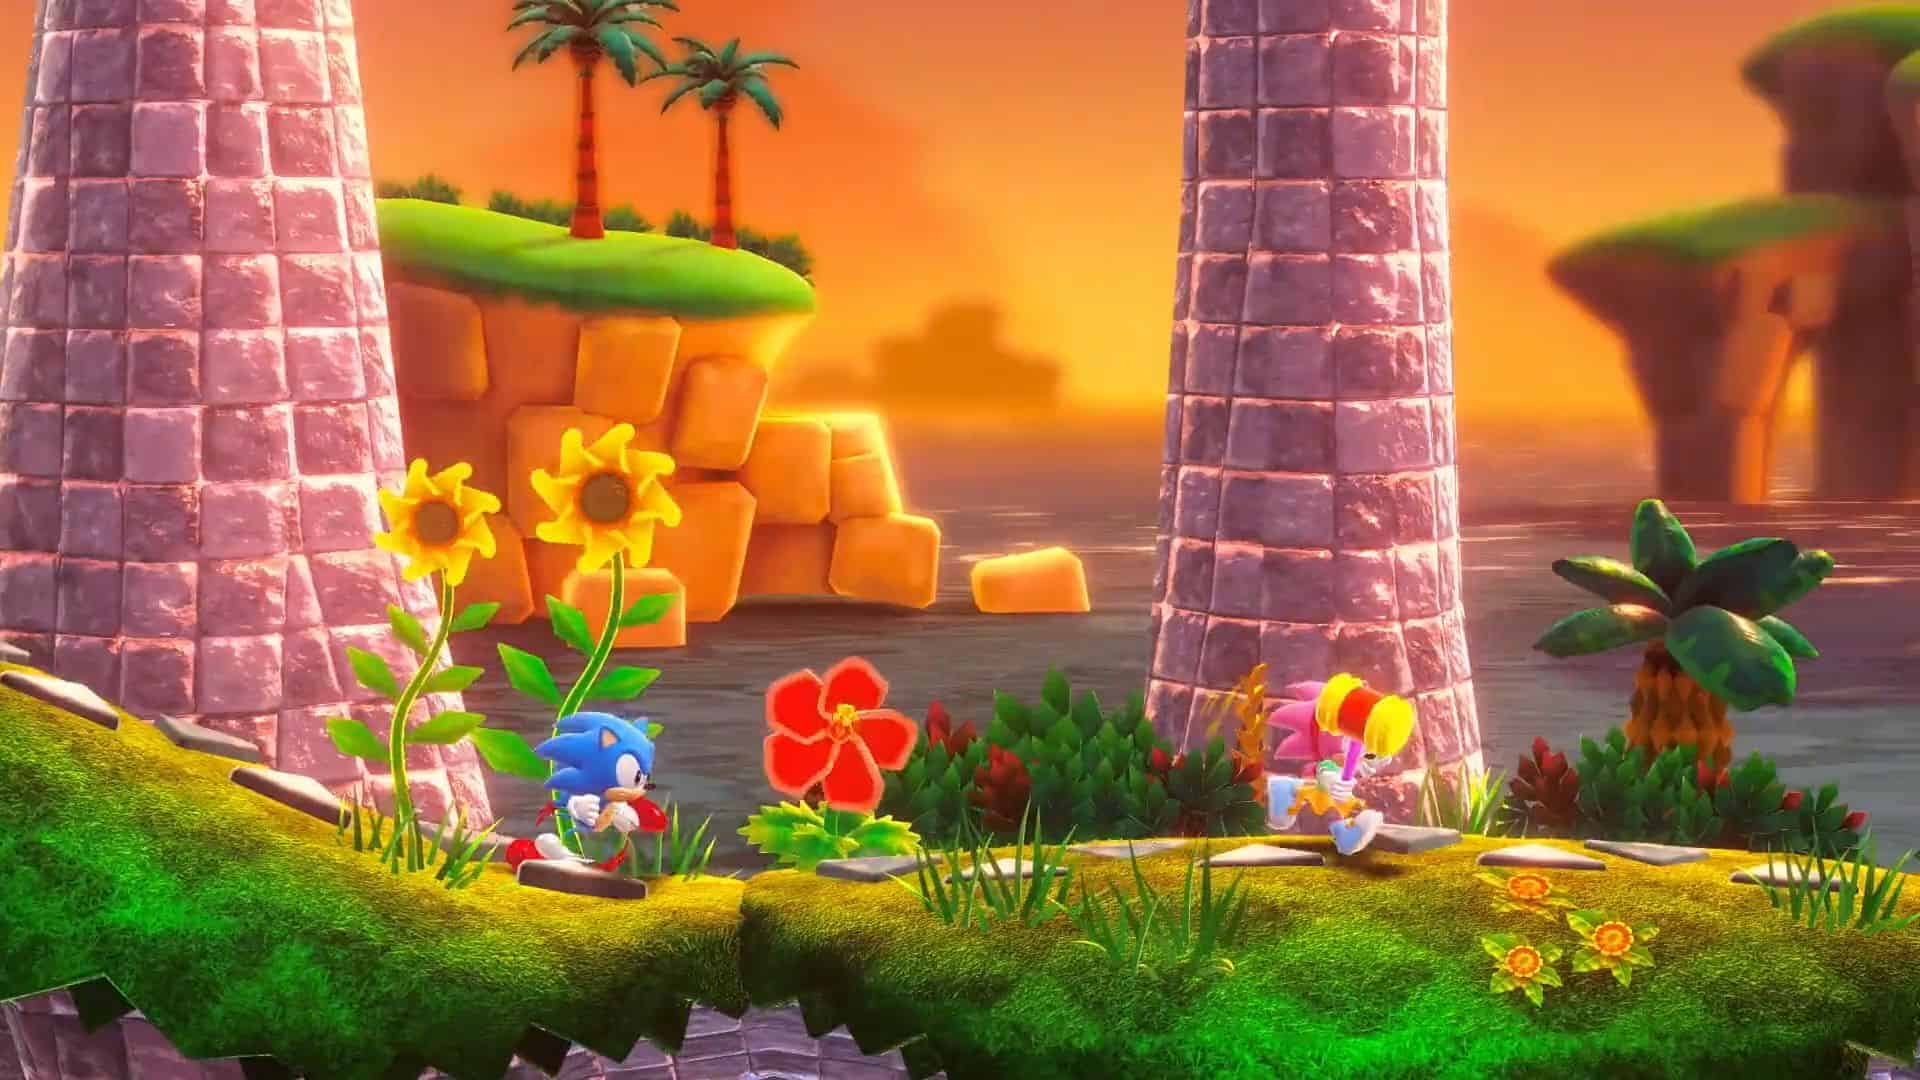 Sonic Superstars Is Skipping Green Hill Zone, Fans Thrilled